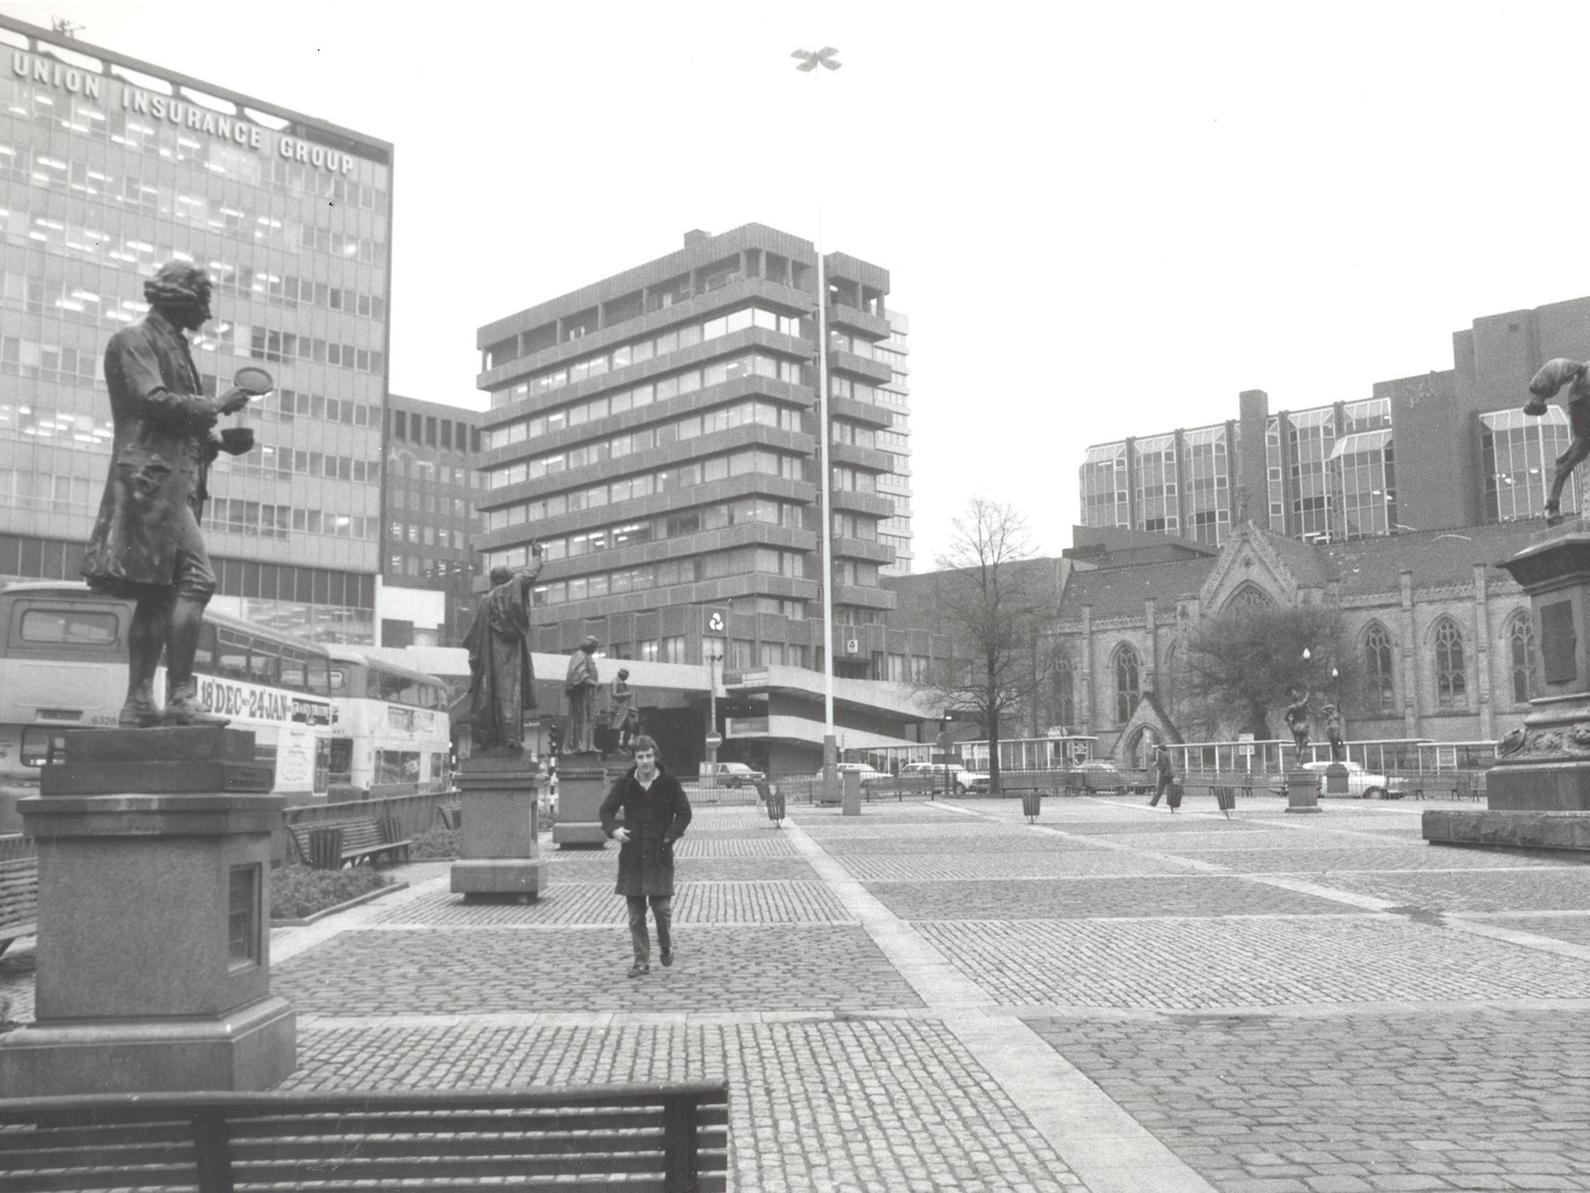 City Square in November 1982. Any hidden statues we have missed? Please get in touch. Email: andrew.hutchinson@jpress.co.uk oer tweet him @AndyHutchYPN